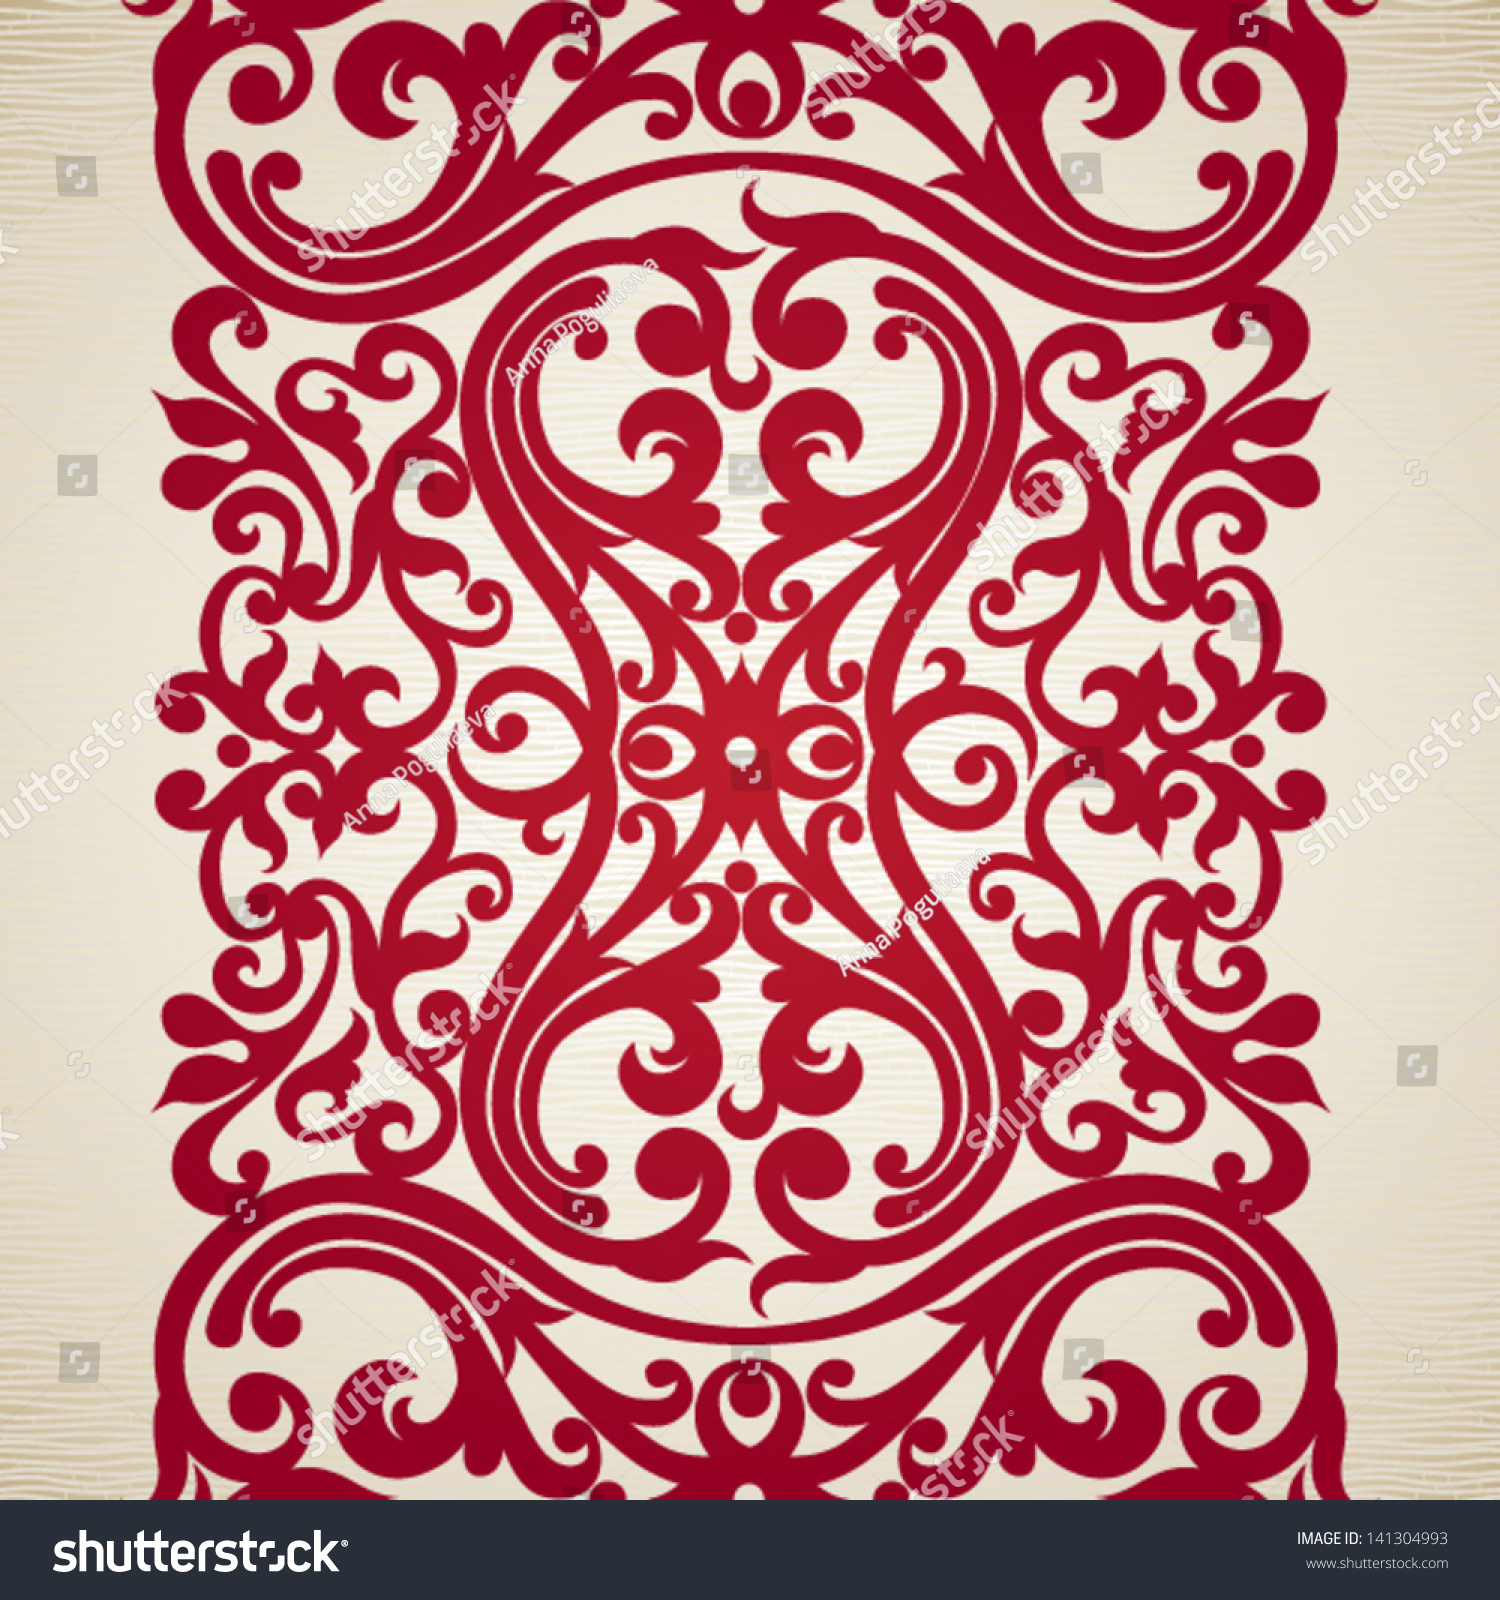 Vector Seamless Border With Swirls And Floral Motifs In Retro Style ...